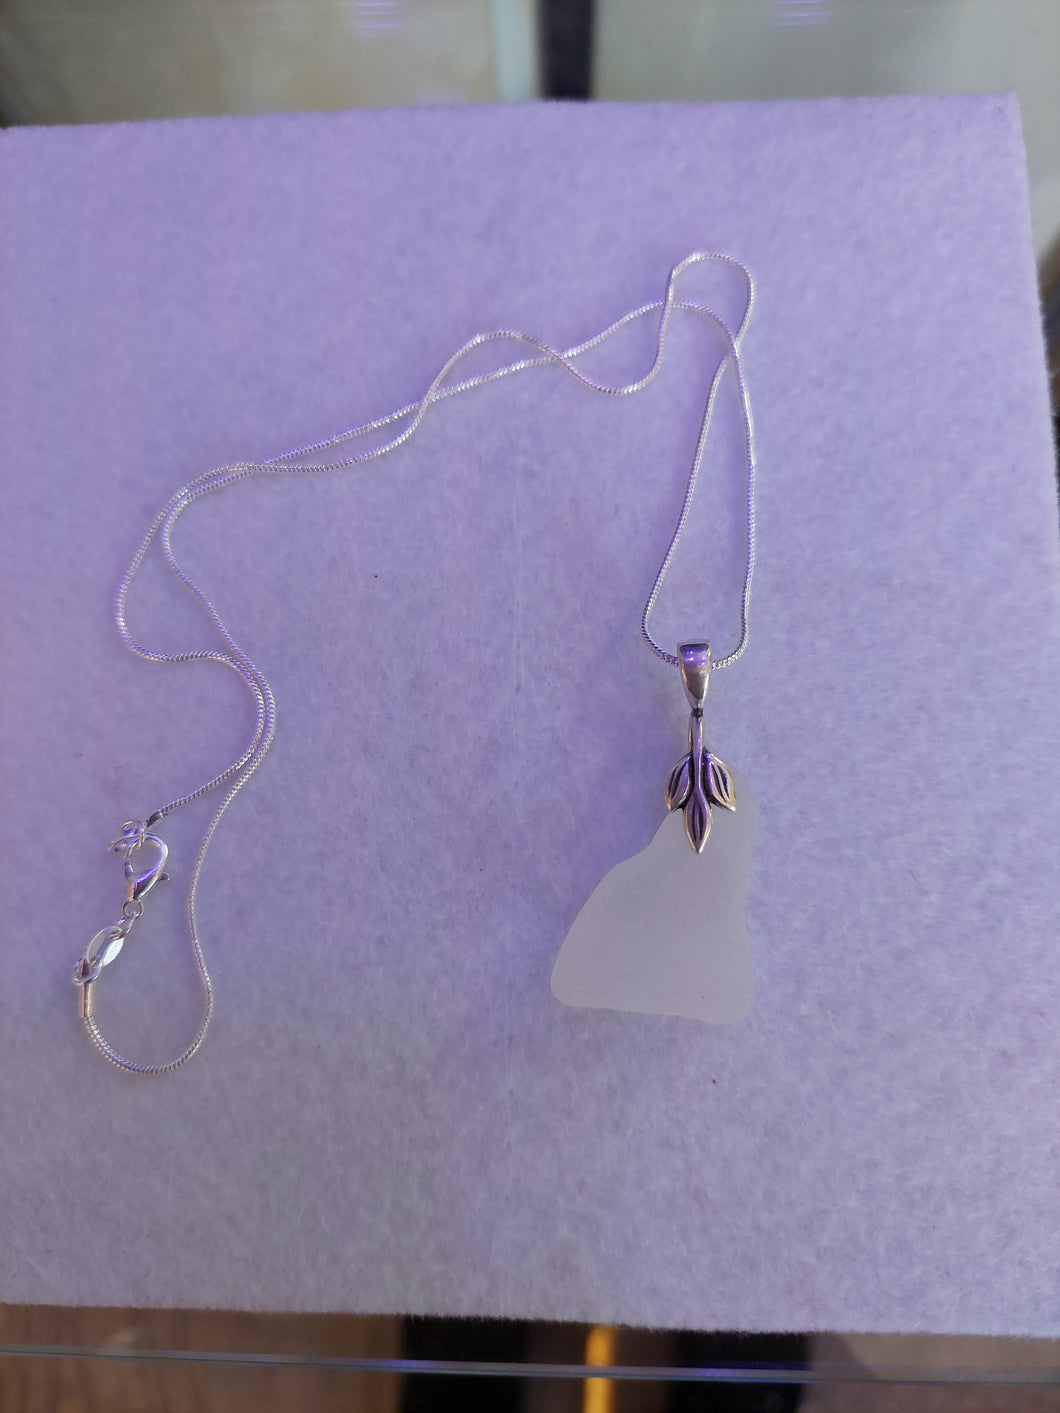 Seaglass Necklace